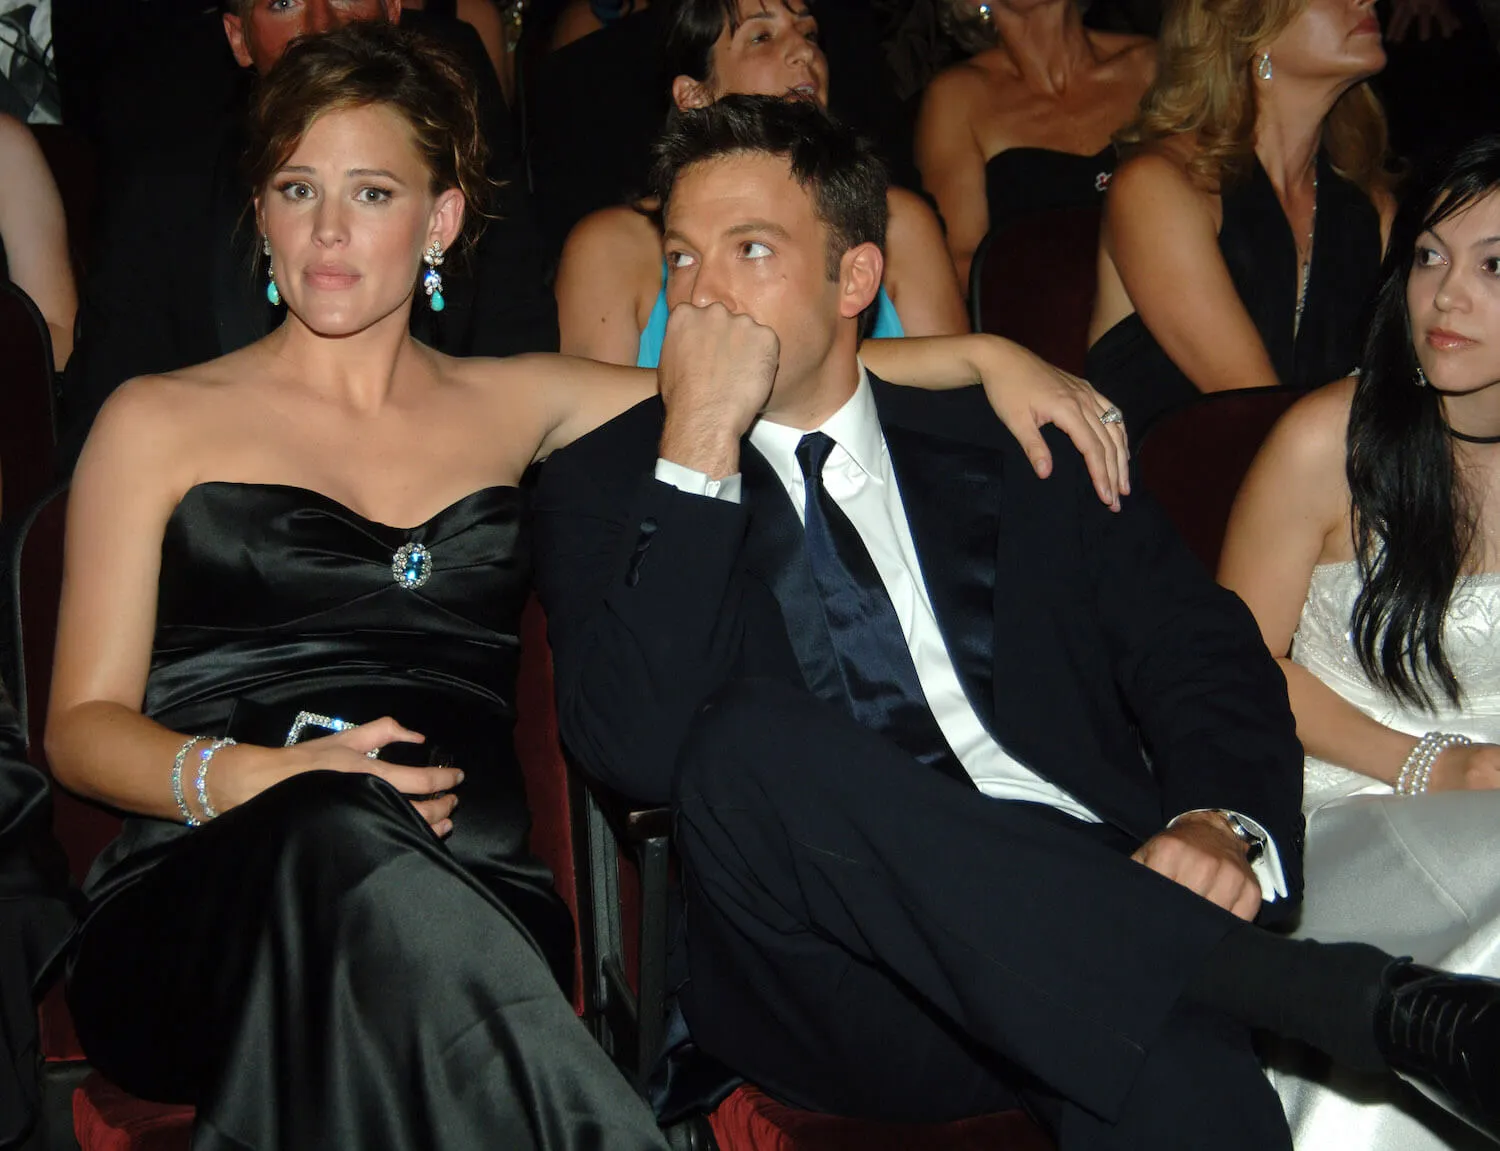 Jennifer Garner sitting in a green dress with her arm around Ben Affleck at the Emmy Awards in 2005